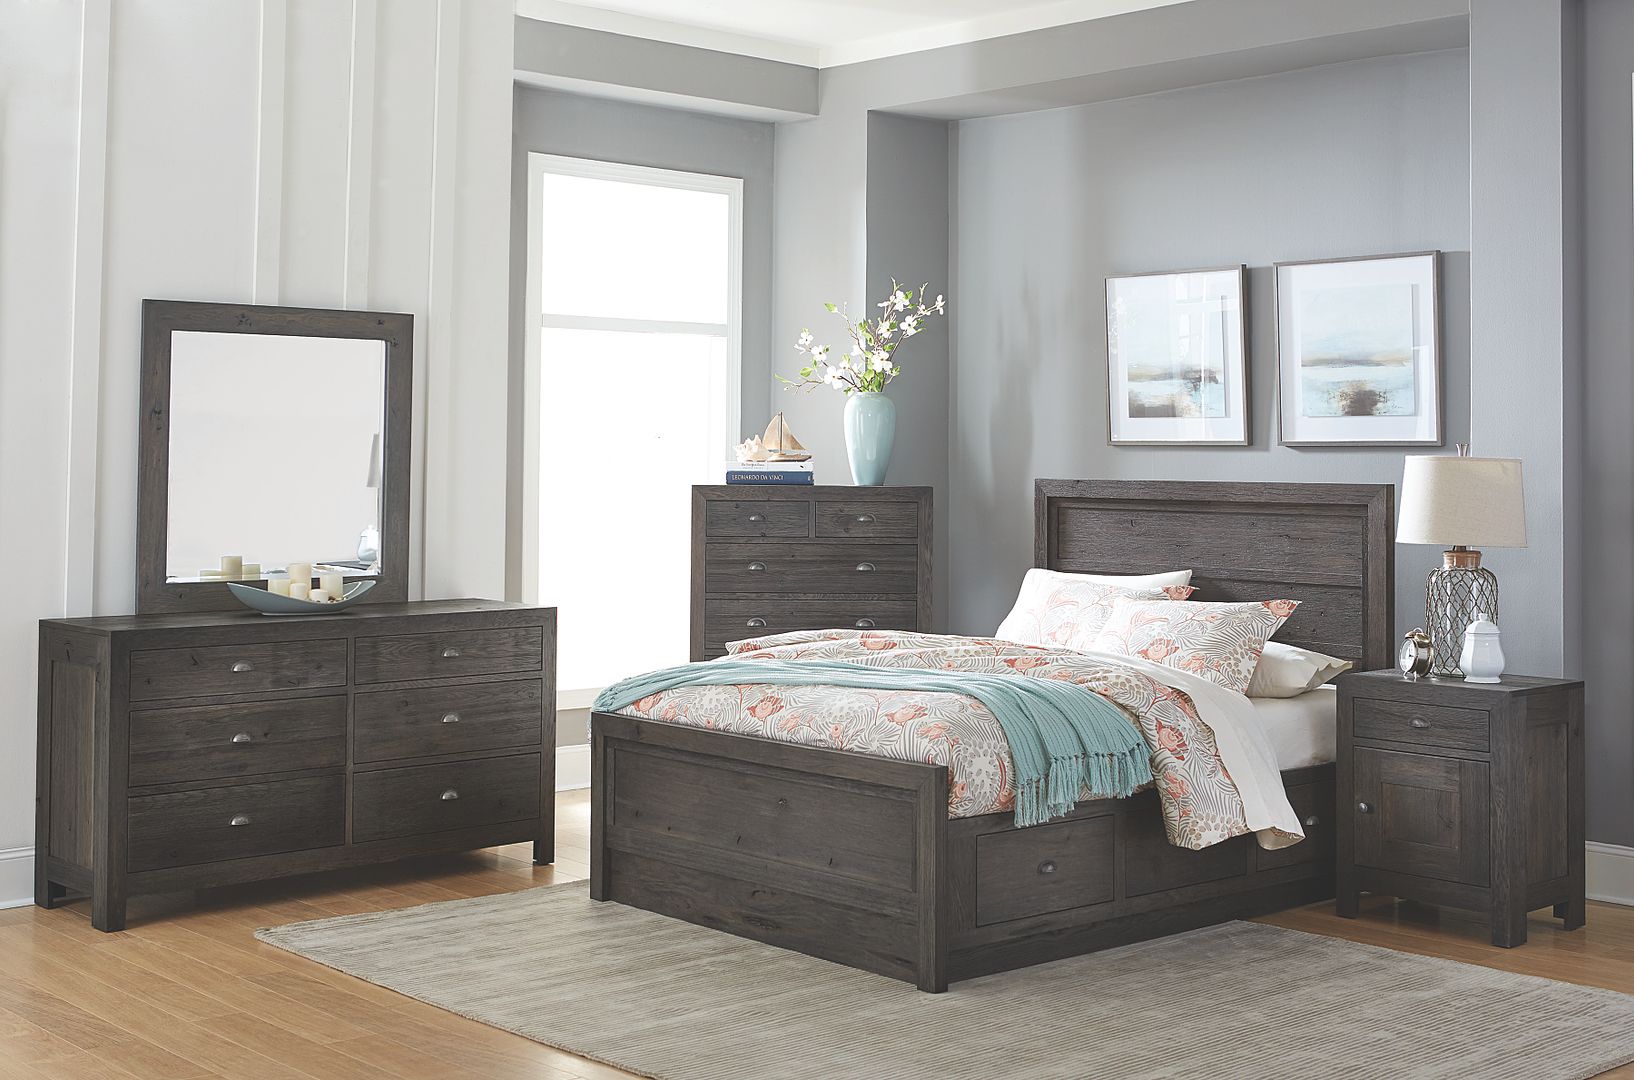 Details About Amish Luxury Bedroom Set Rustic Modern Solid Wood Gray Queen King Sonoma 5 Pc